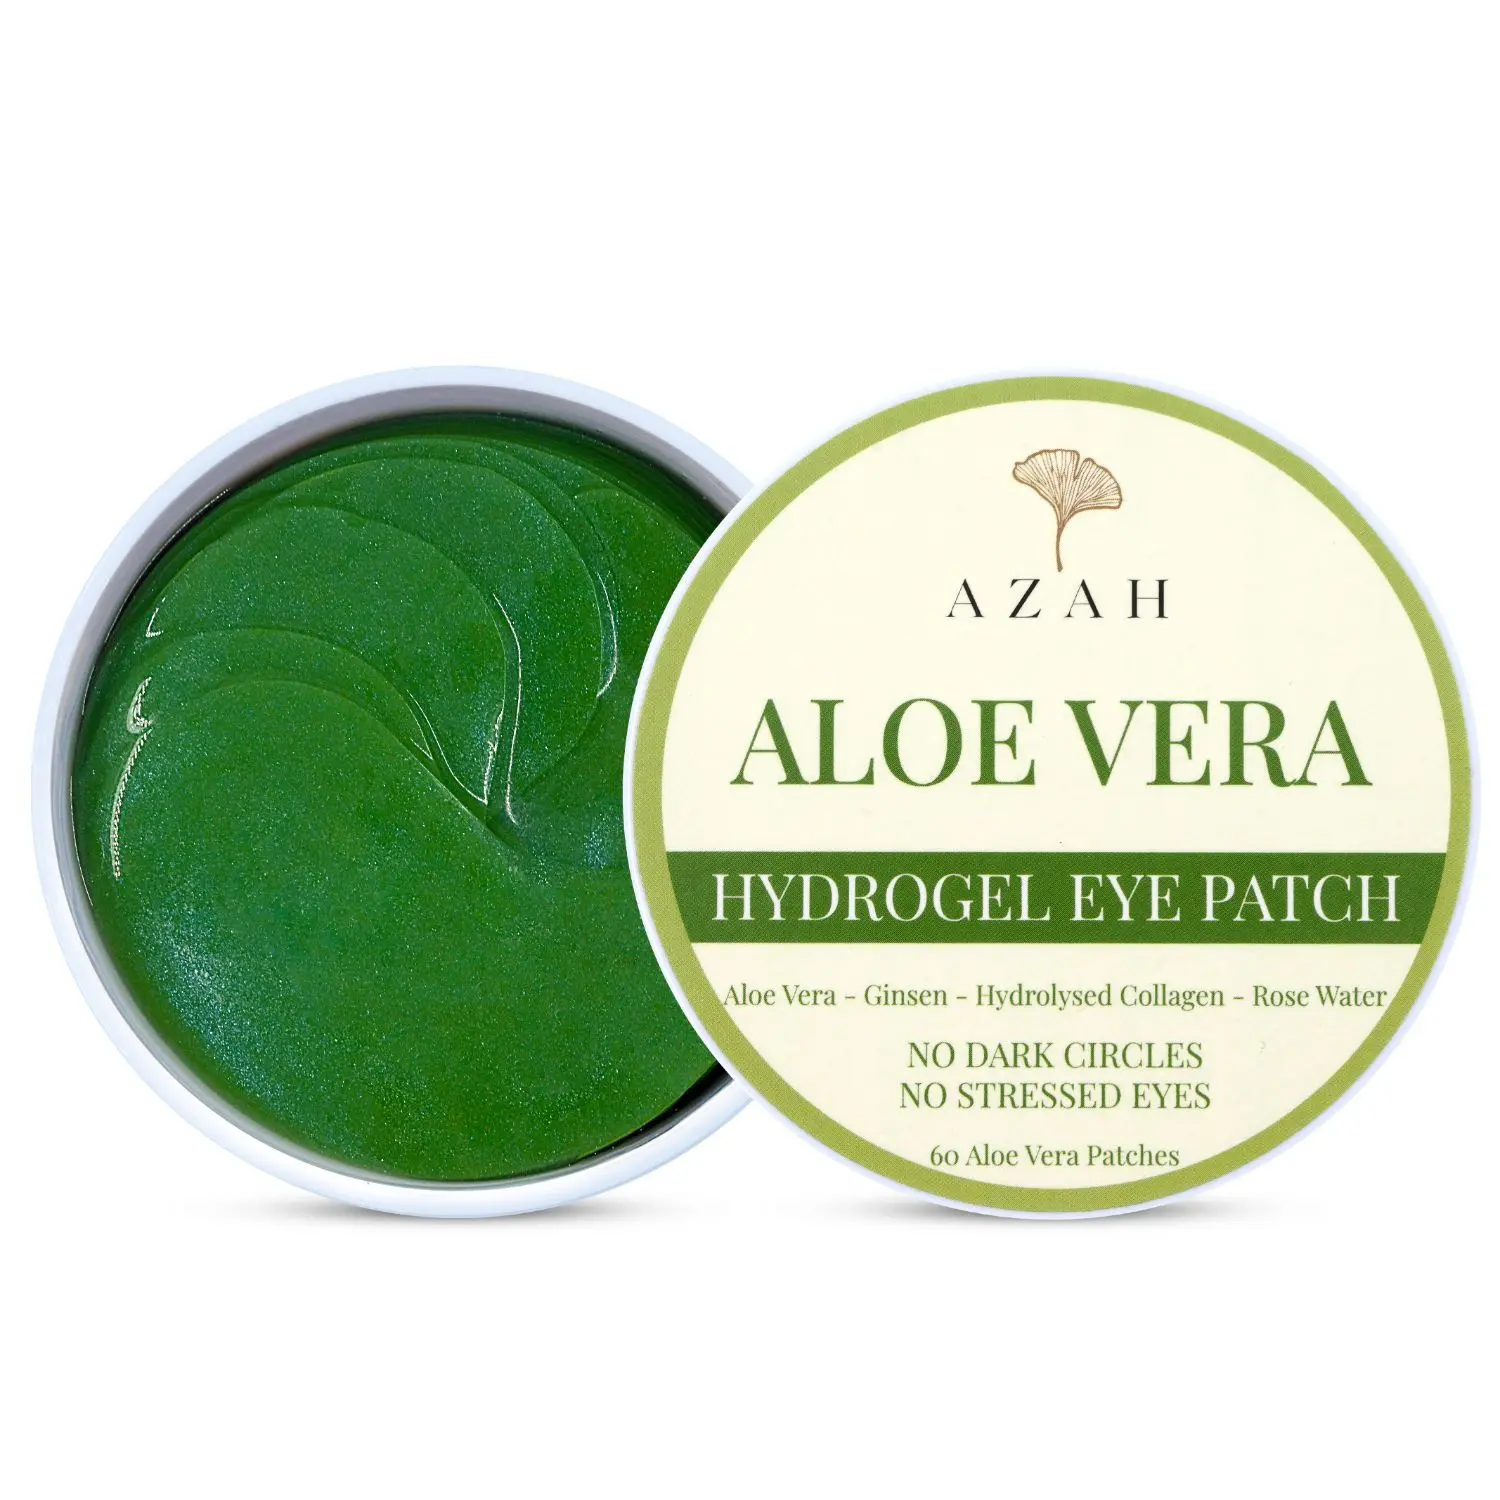 Azah Under Eye Patches for Dark Circles with Aloe Vera | Pack of 60 Eye Cooling Gel Pads